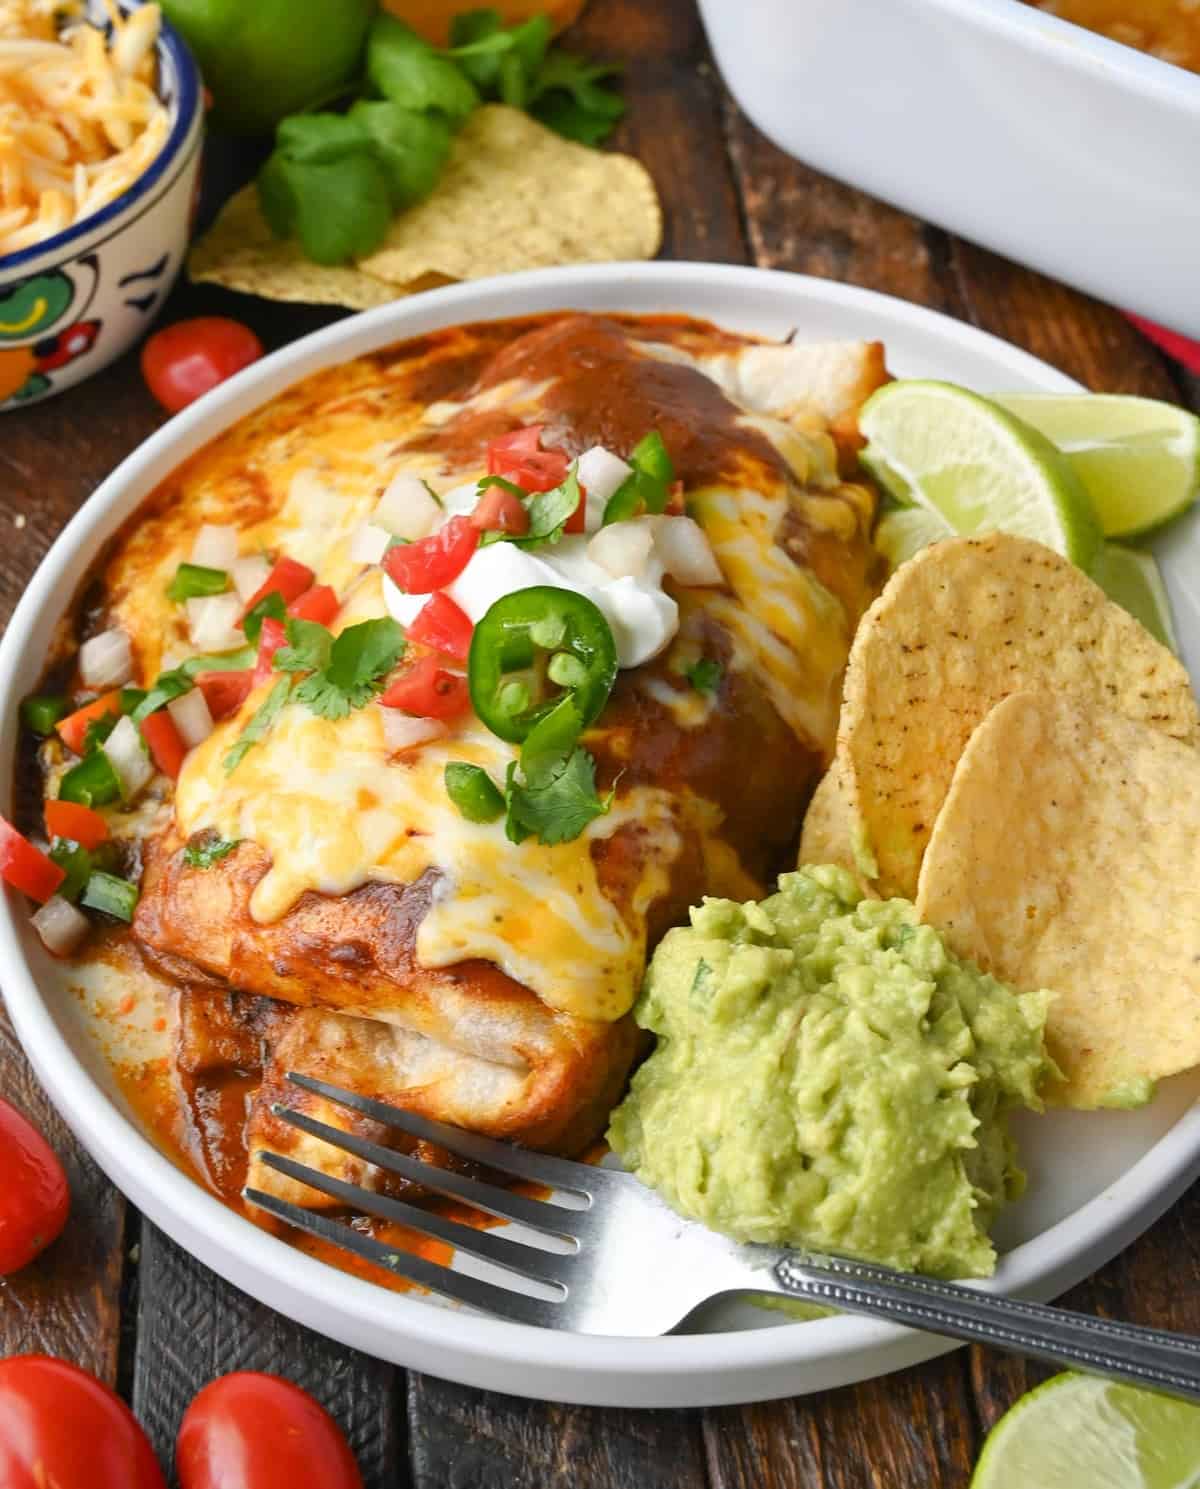 Smothered chicken burrito on a plate with chips and guacamole.